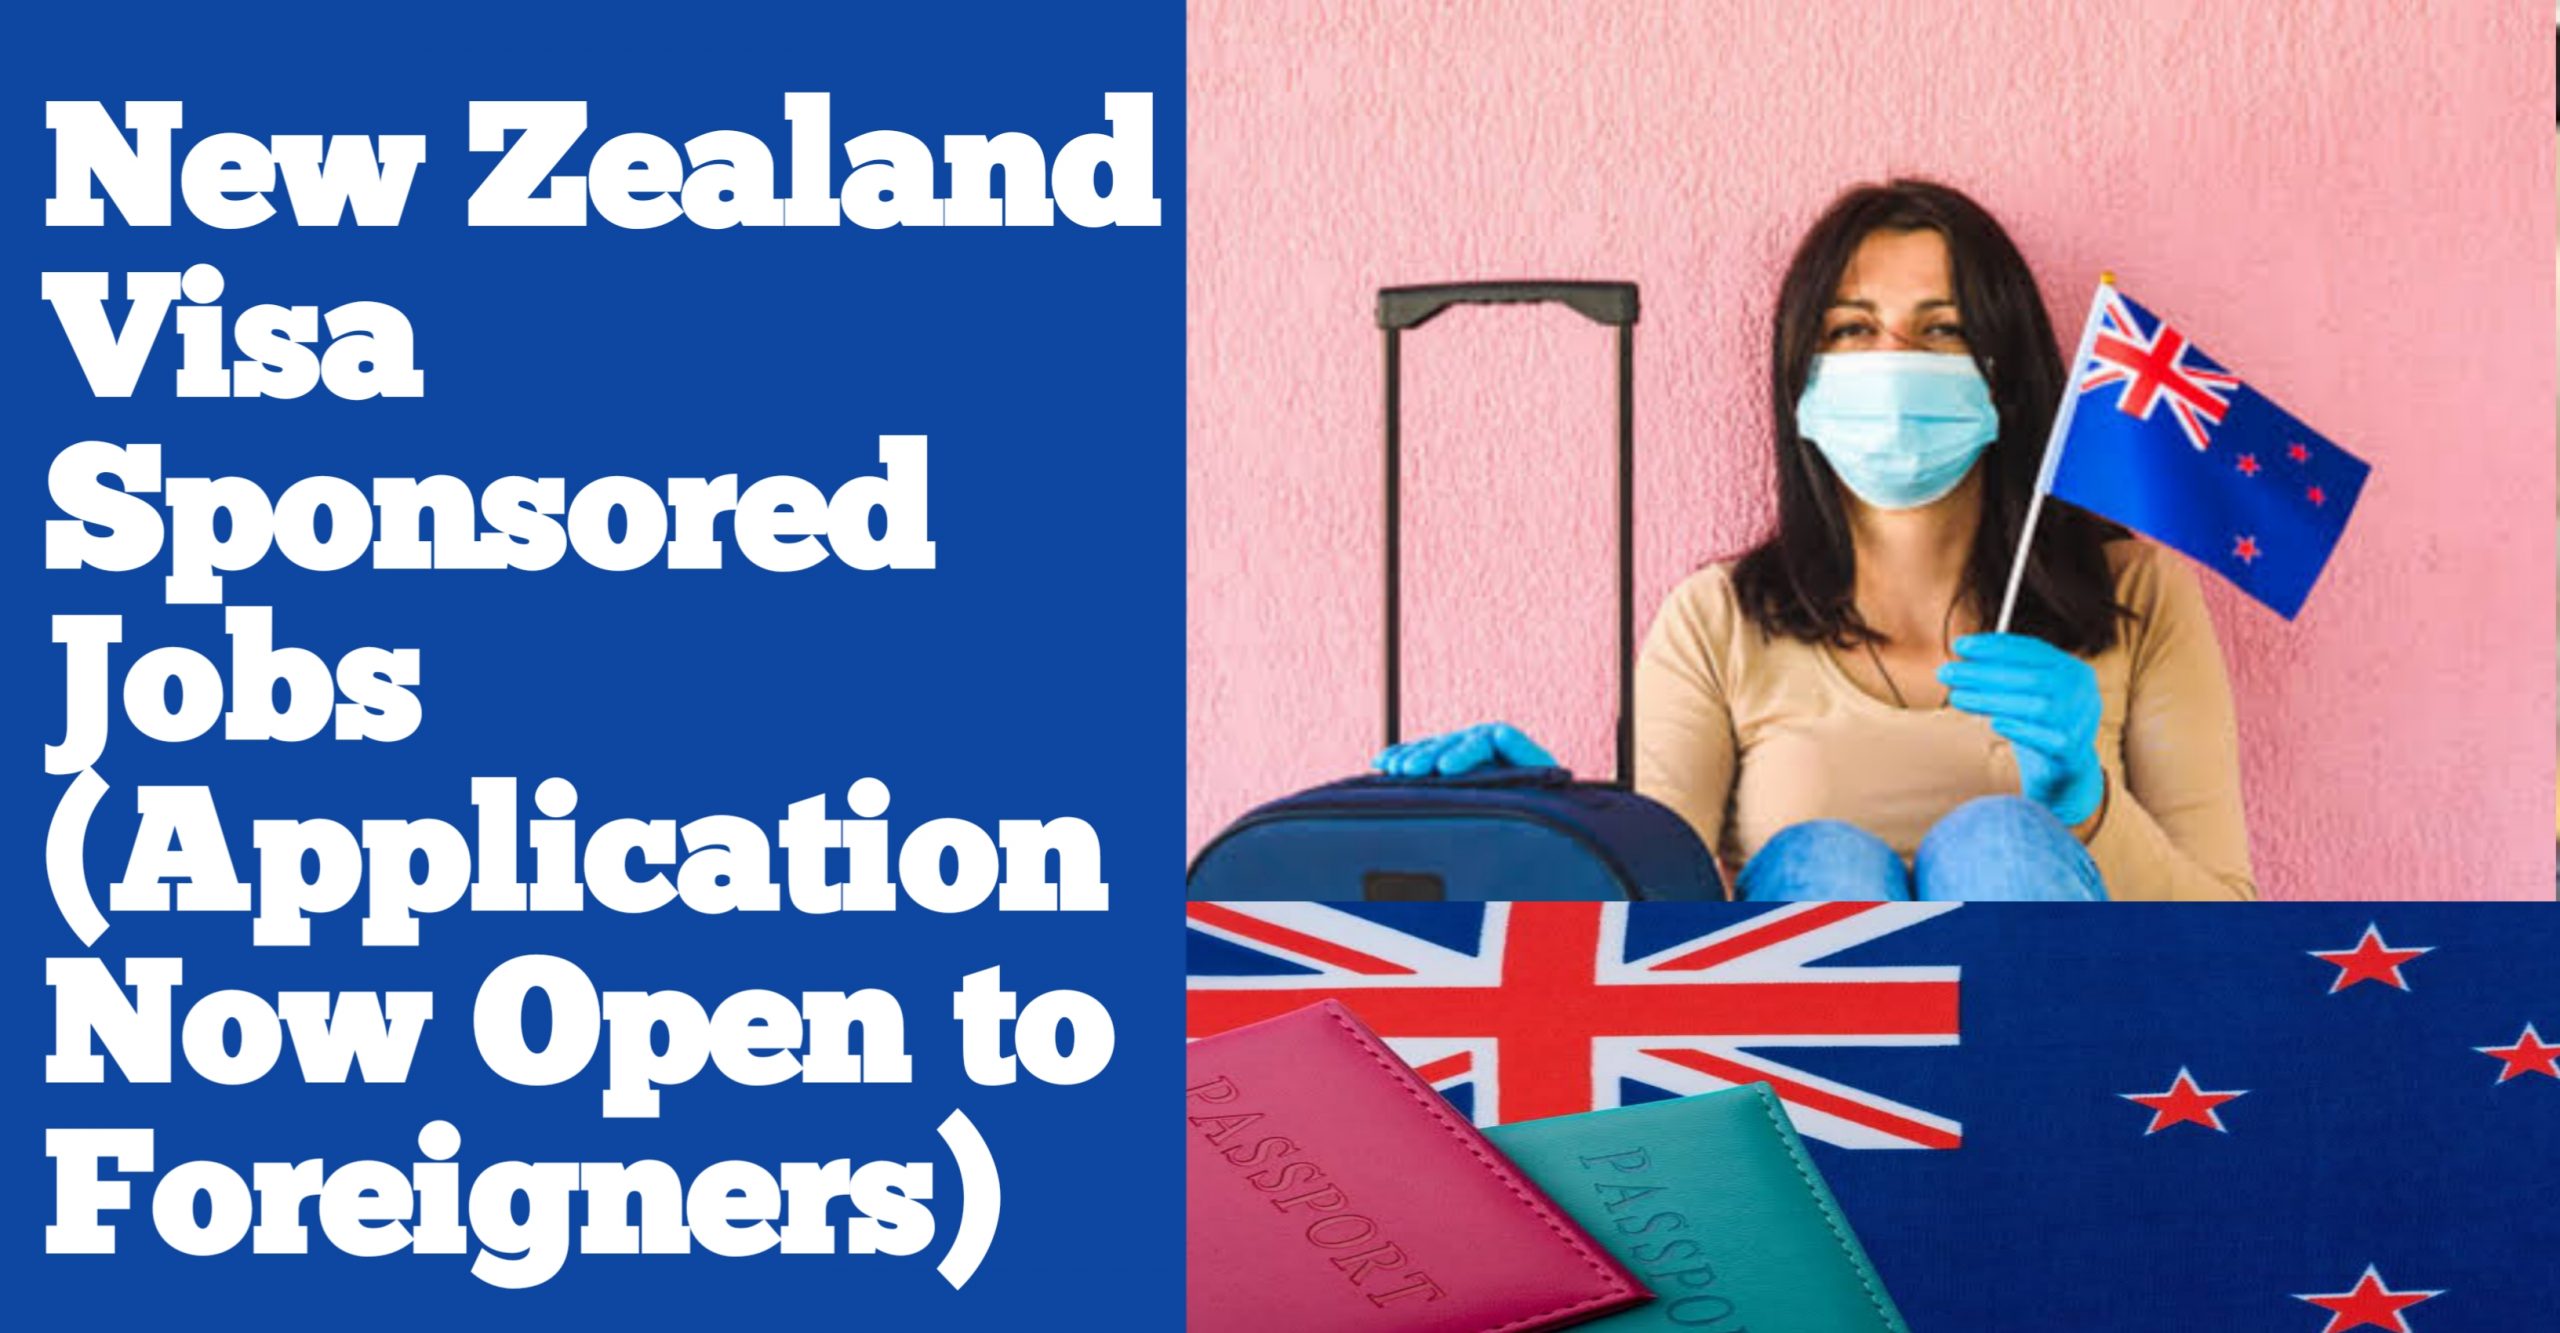 20221019 161817 scaled - New Zealand Visa Sponsored Jobs (Application Open to Foreigners)